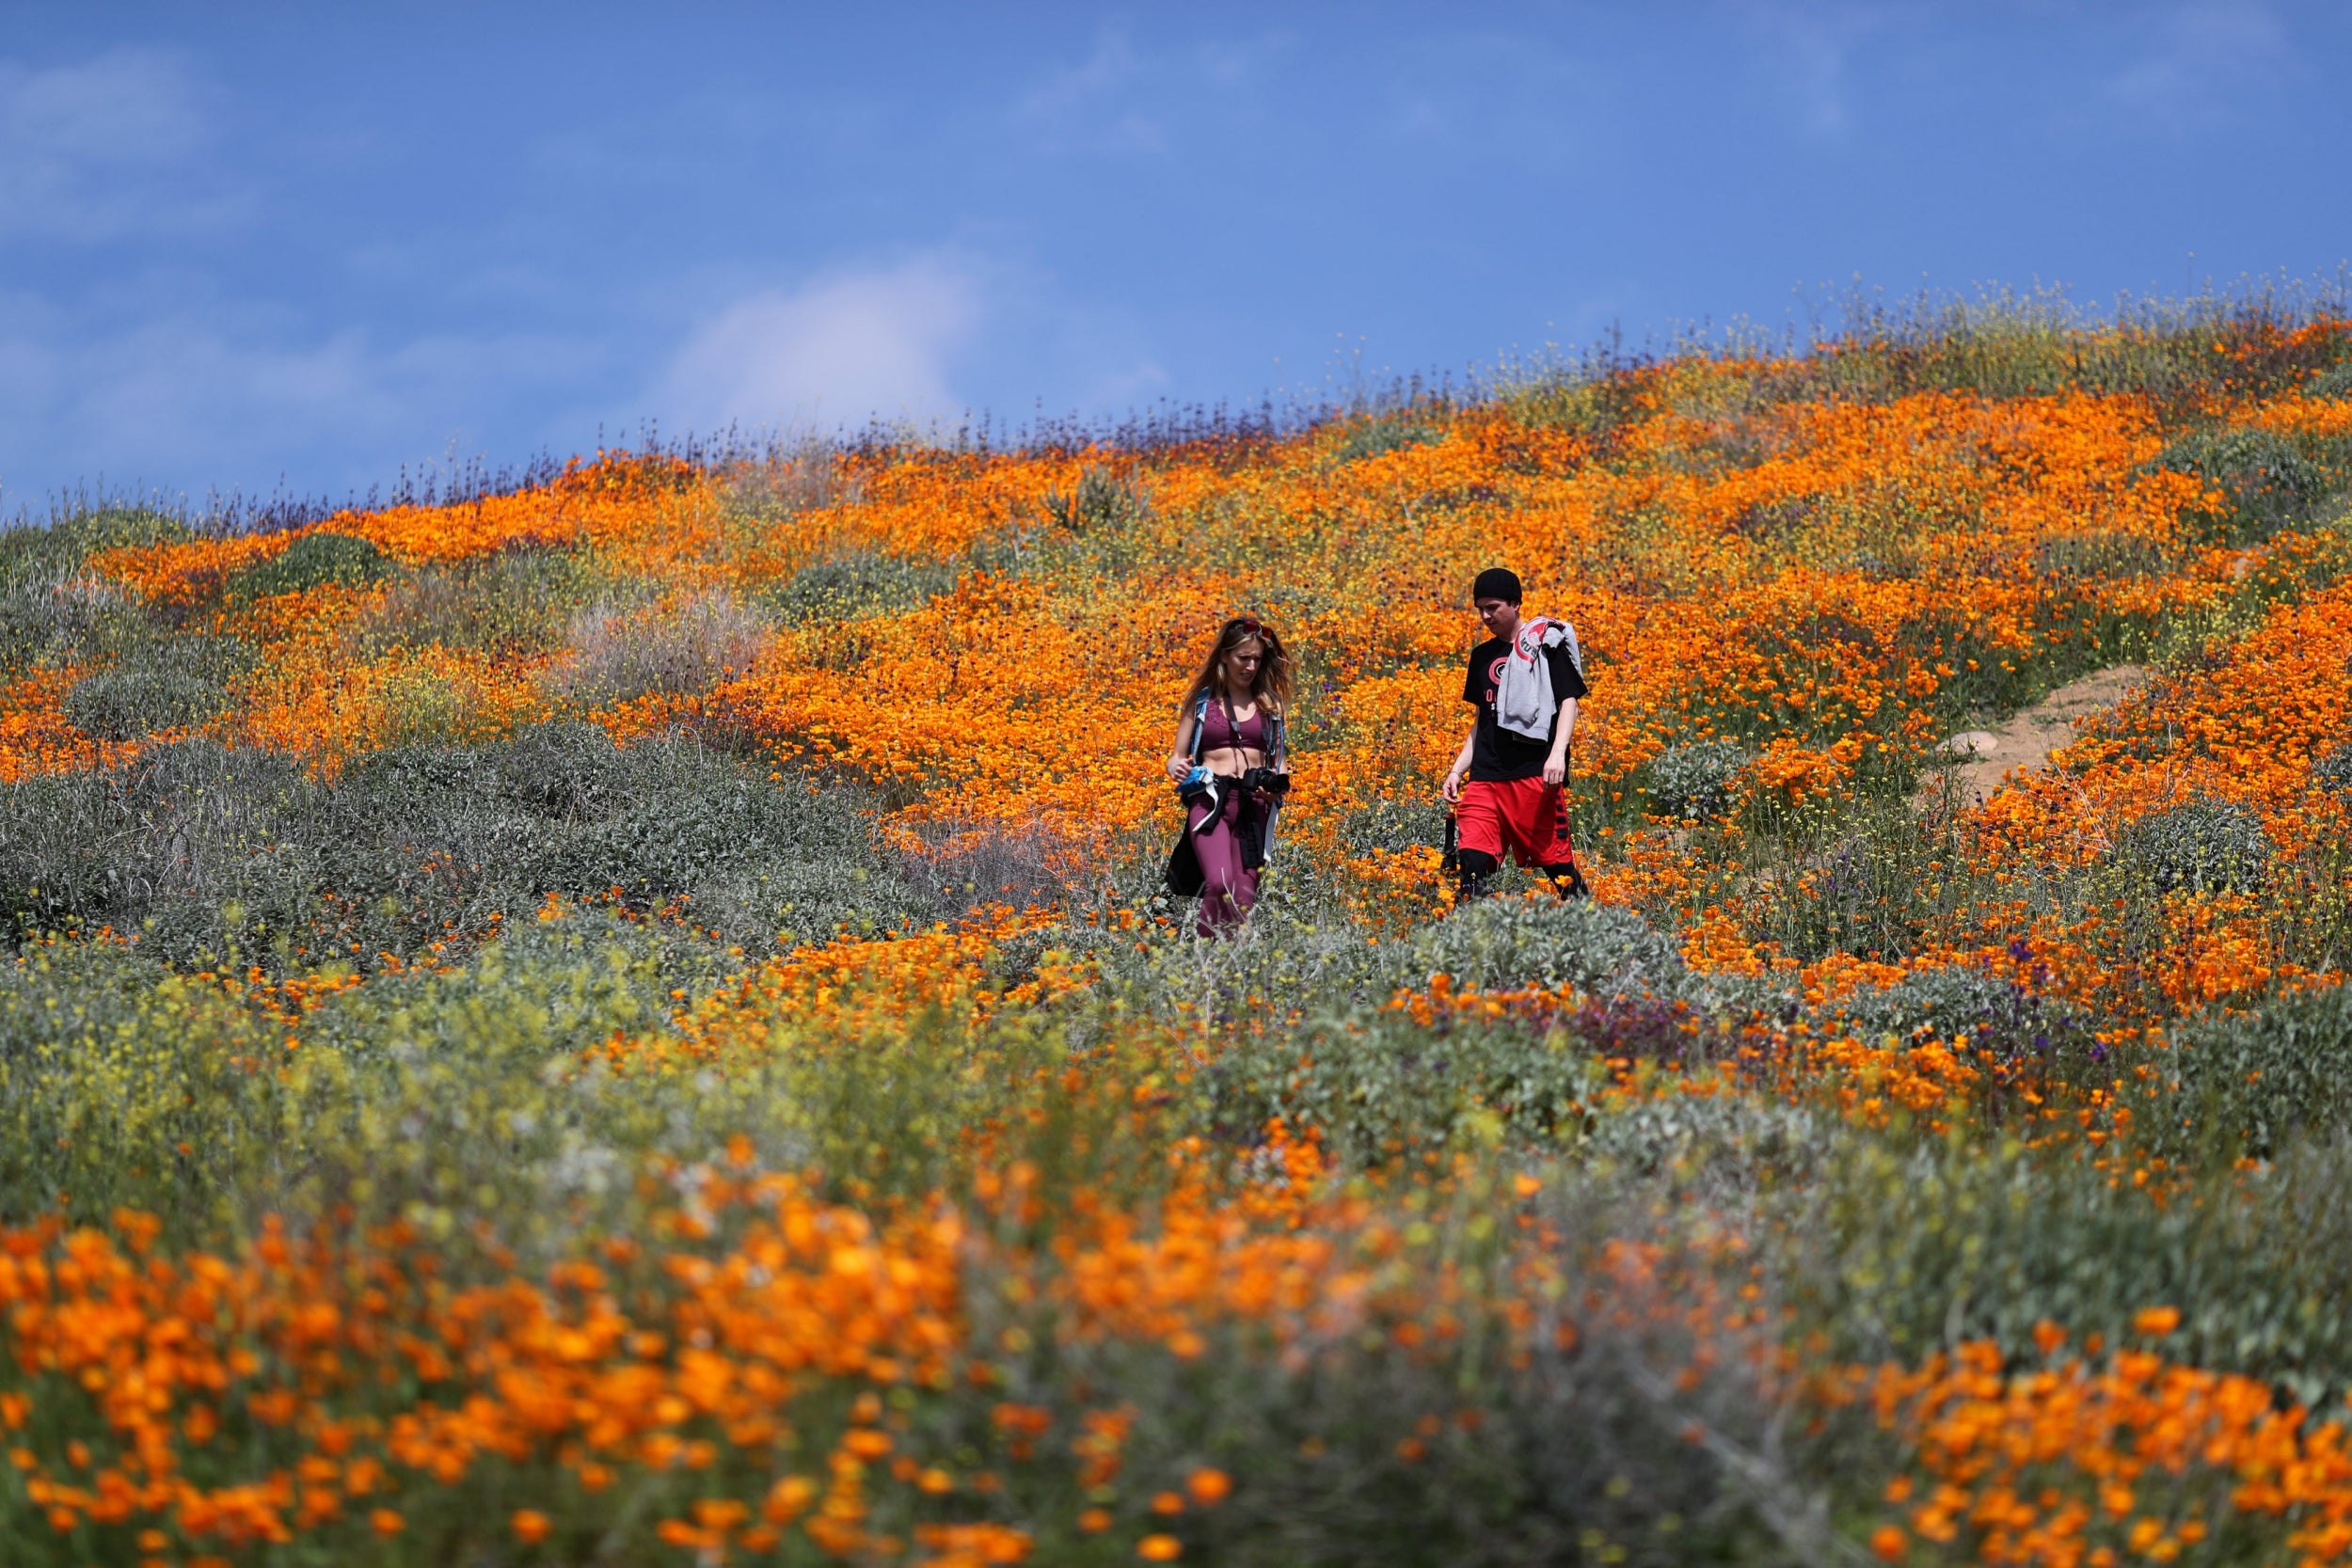 Southern California's Anza-Borrego desert is covered in swathes of colourful wildflowers after weeks of heavy rains